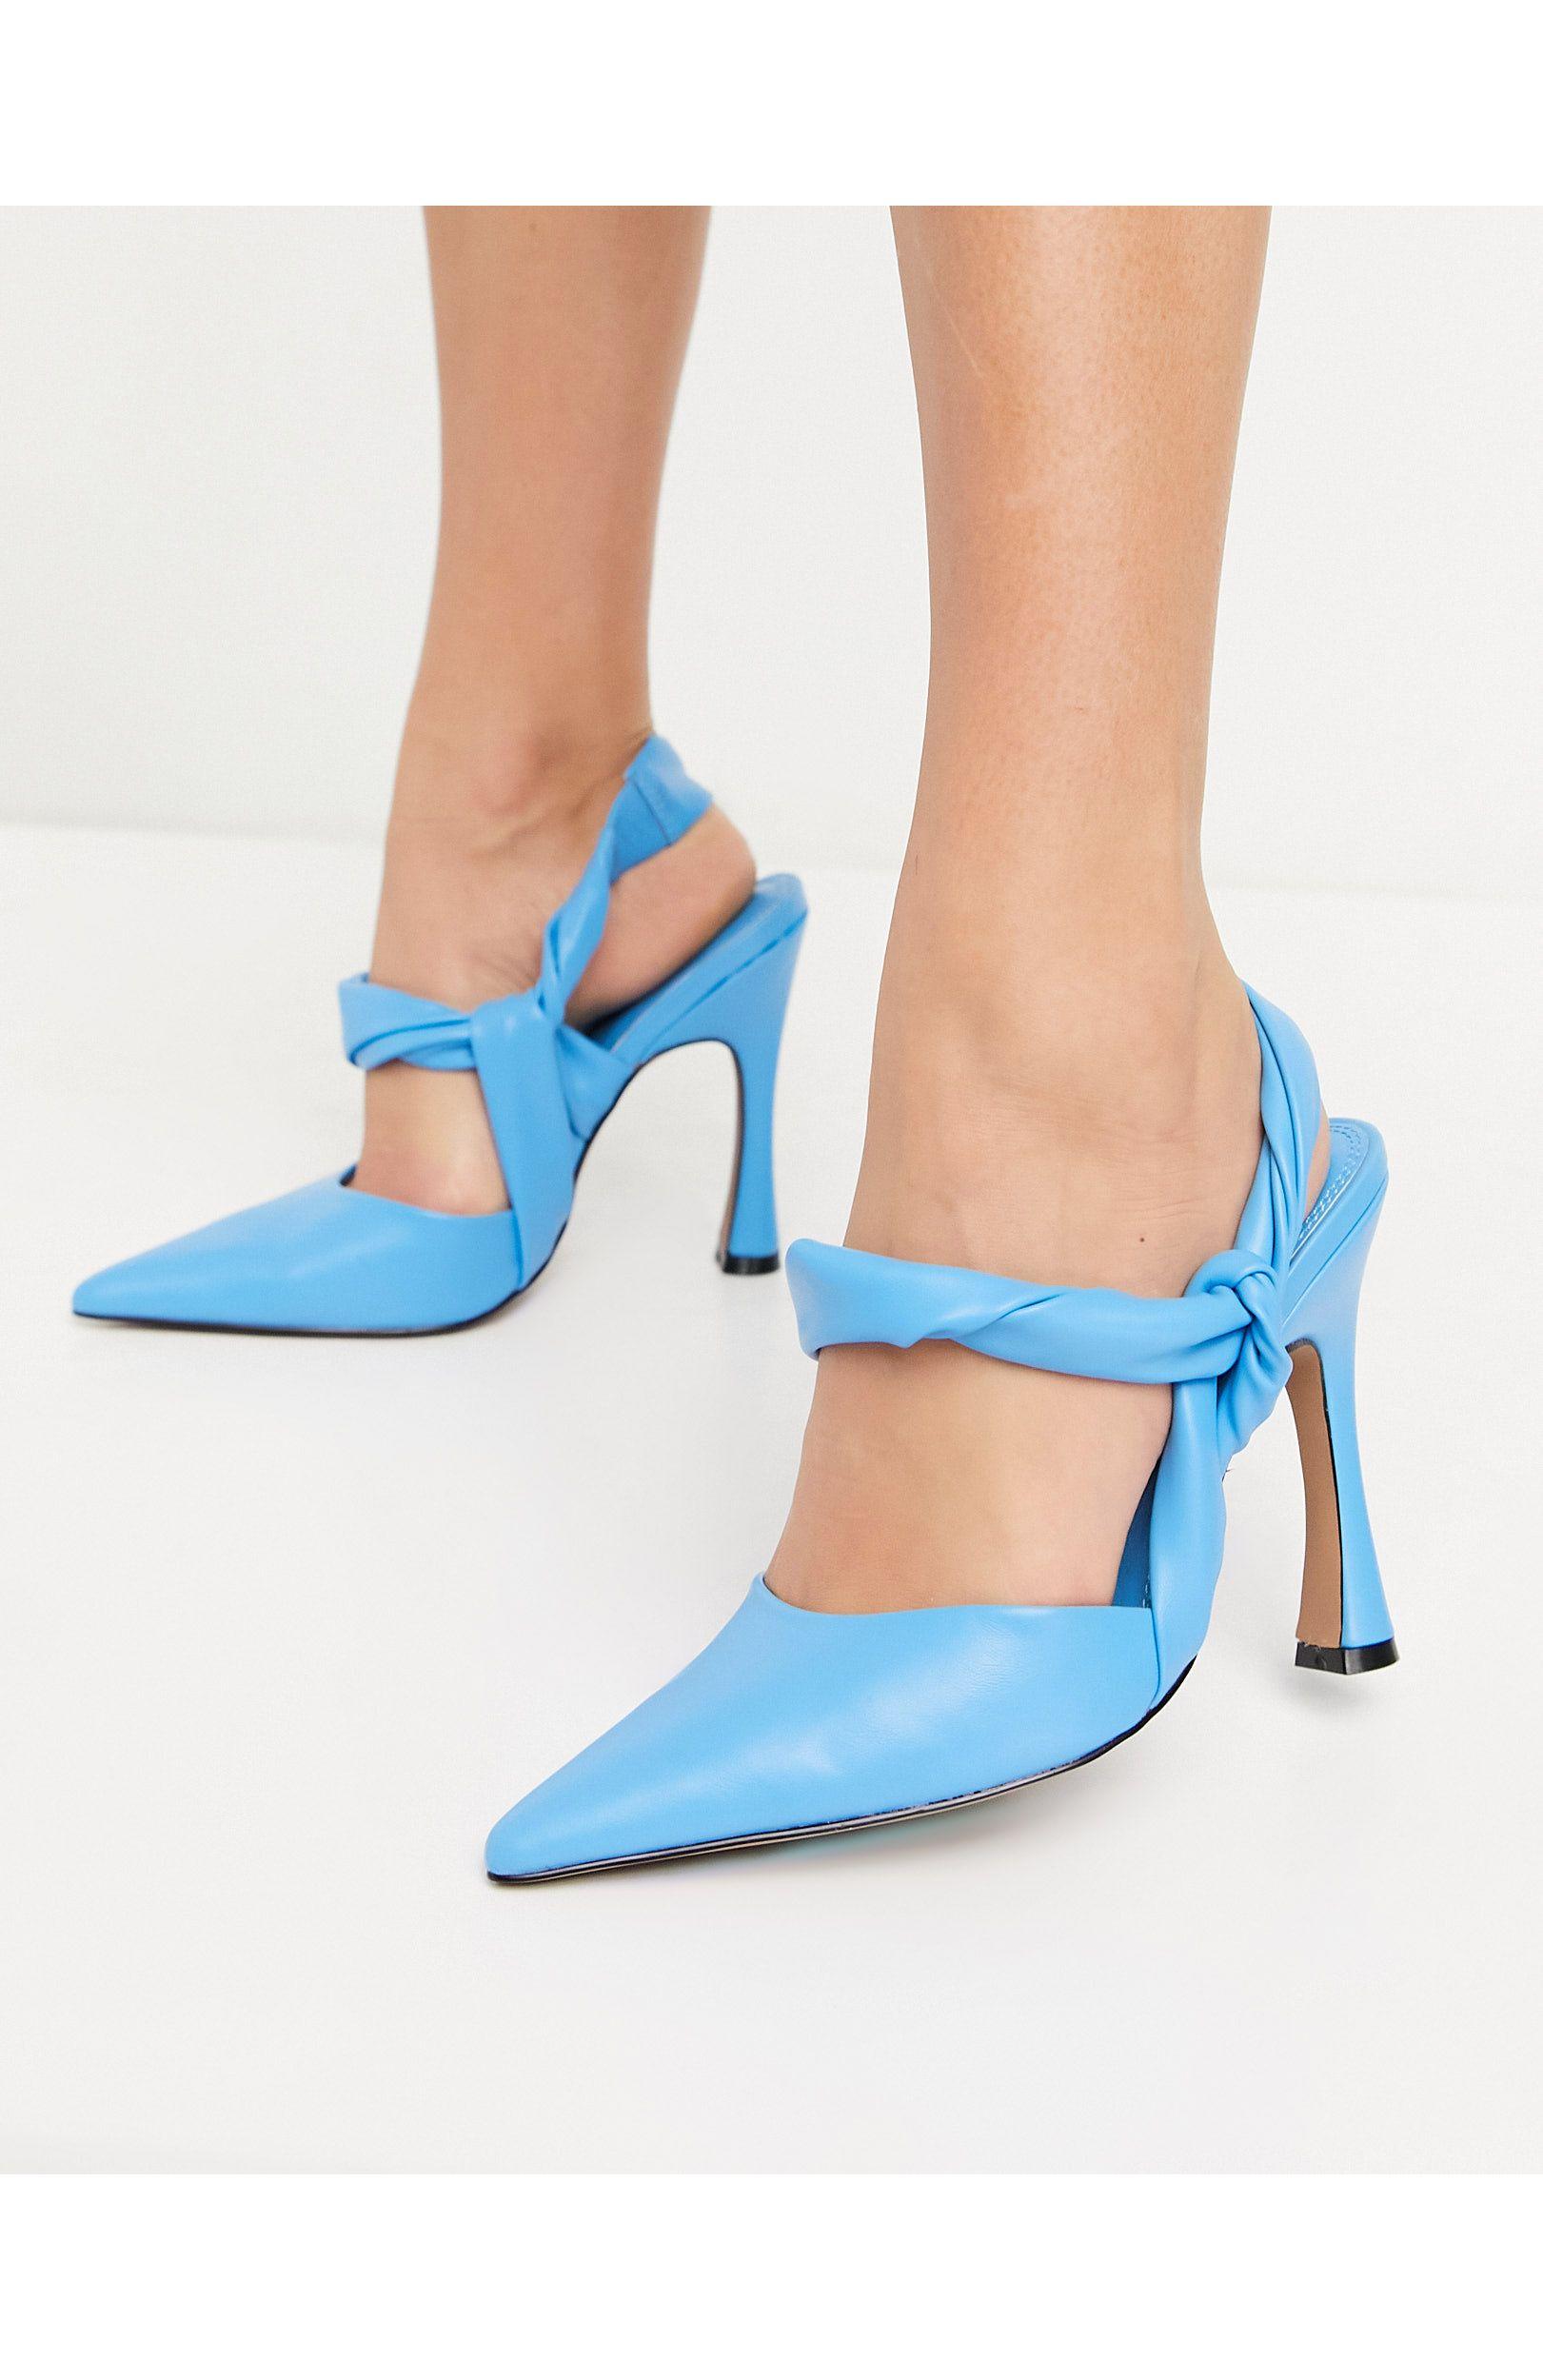 ASOS Peppermint Slingback High Shoes in Blue | Lyst UK